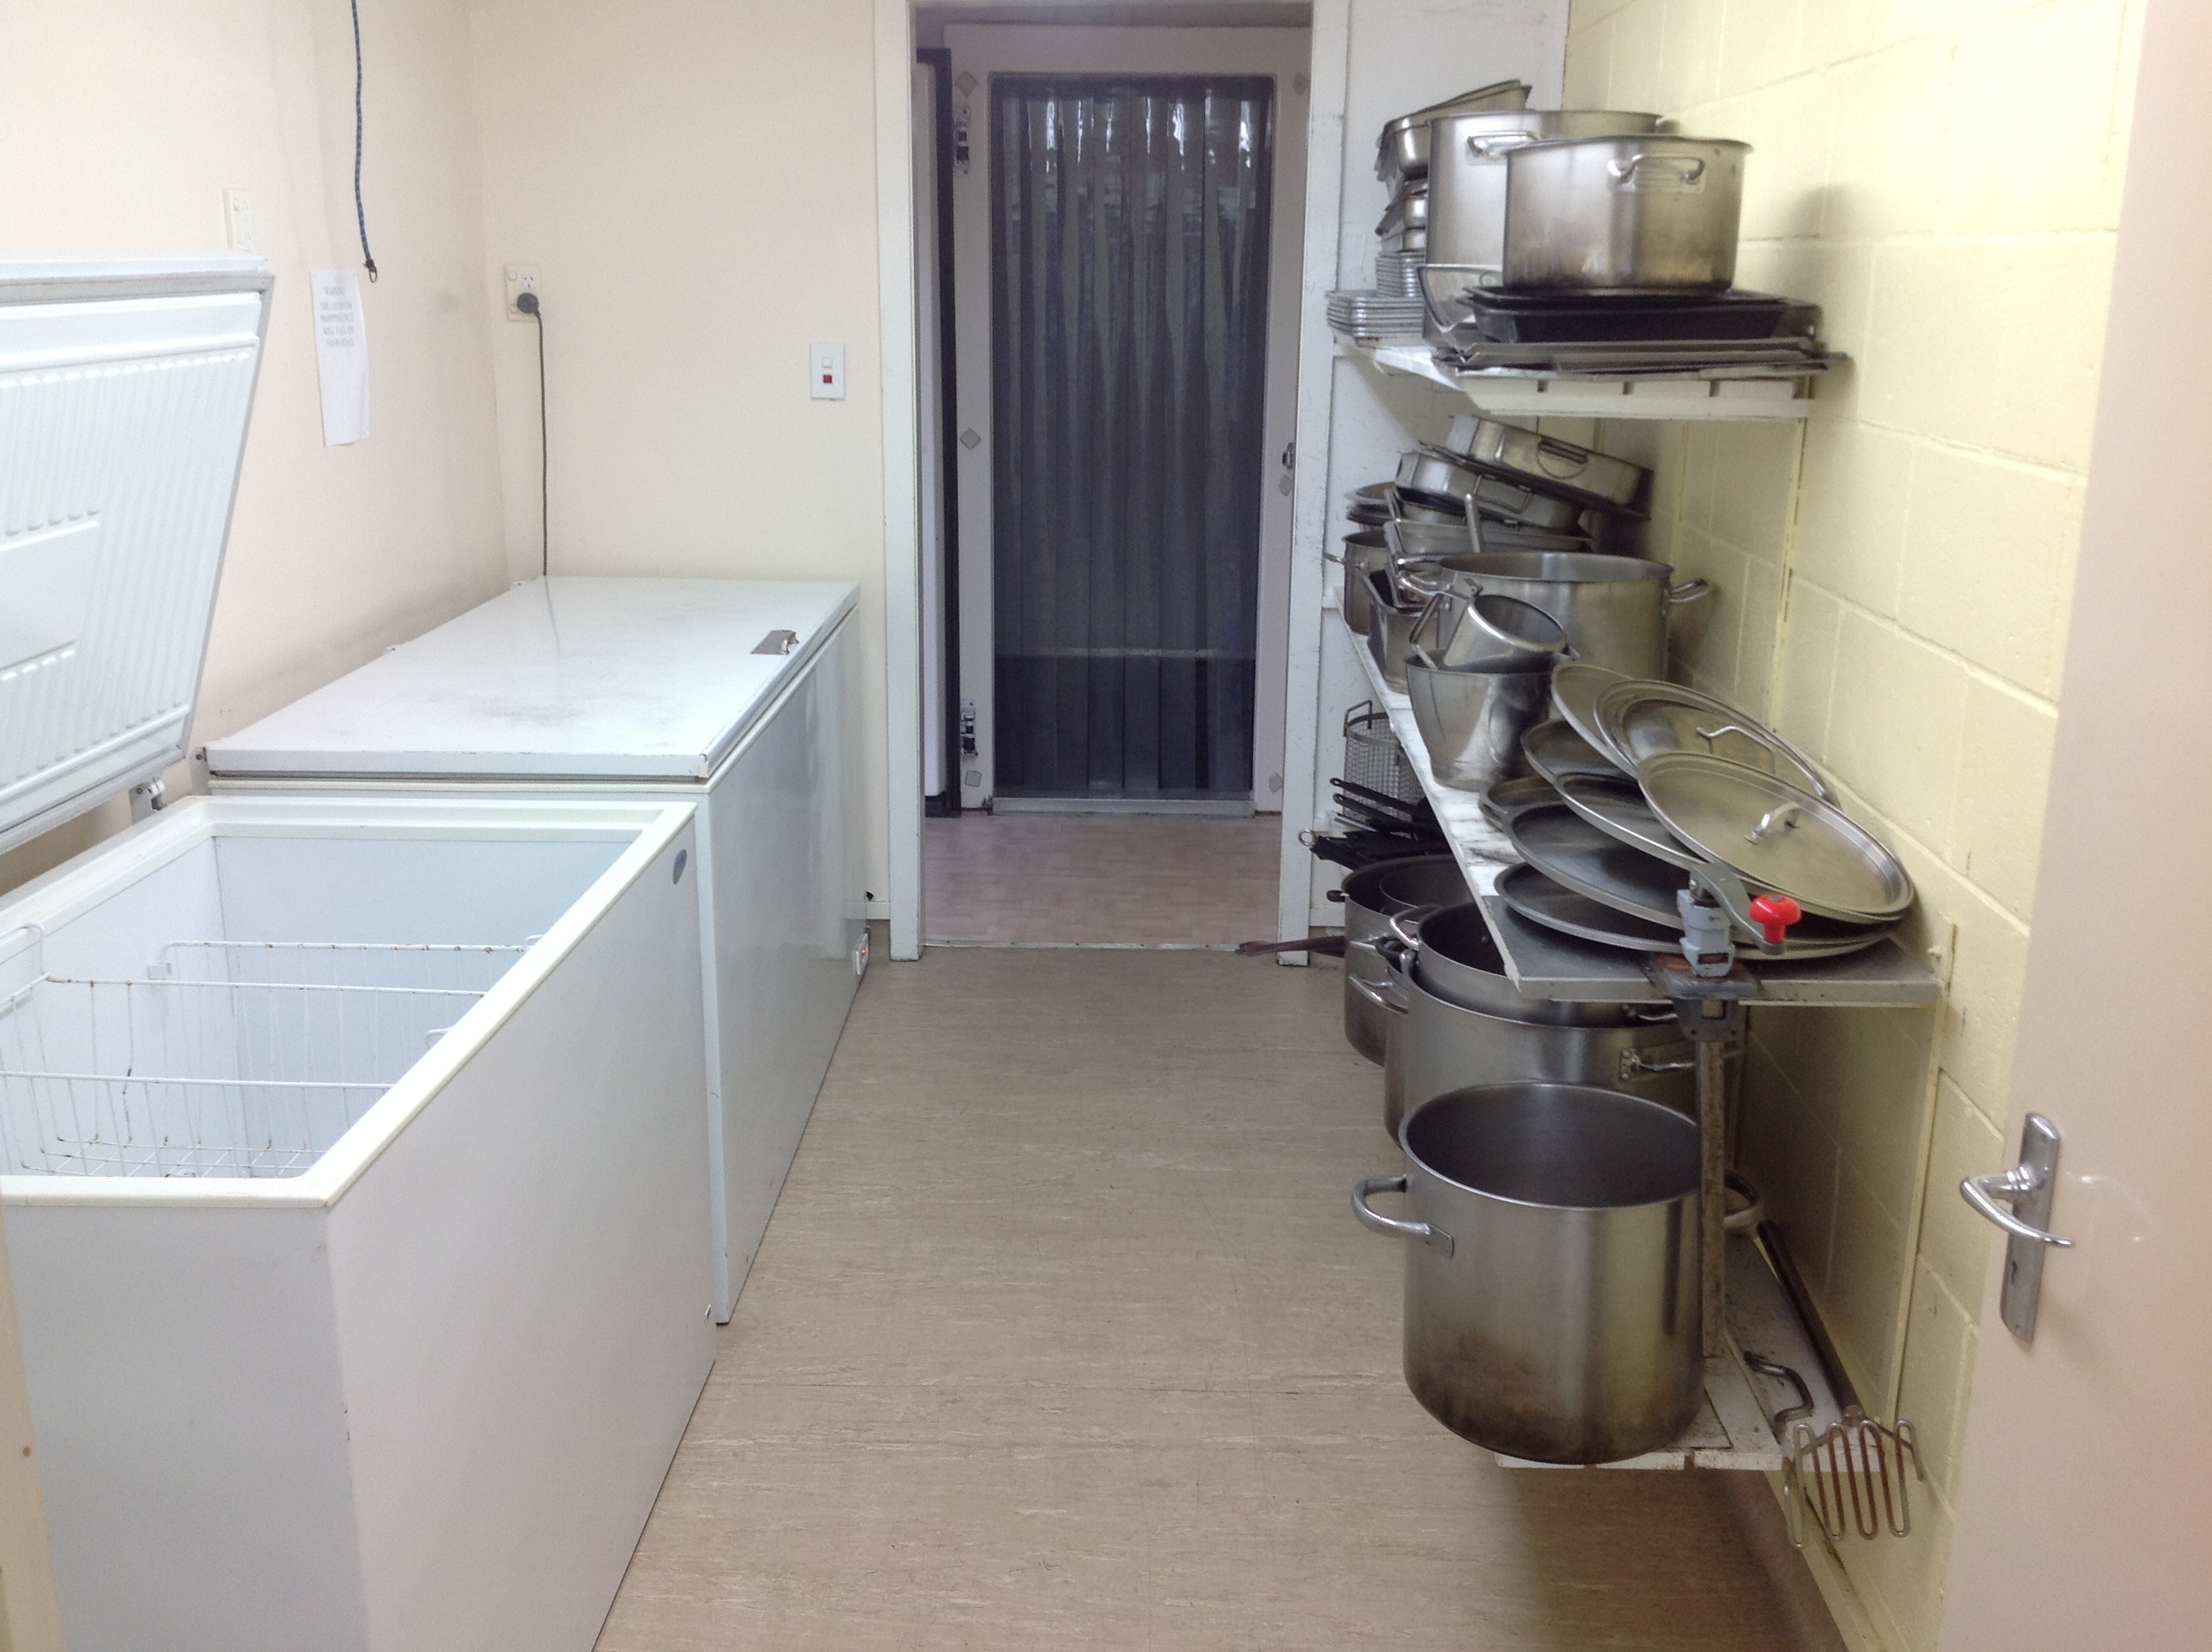   2 fridges, 2 freezers and a walk in chiller. Pots, pans and trays all supplied.  